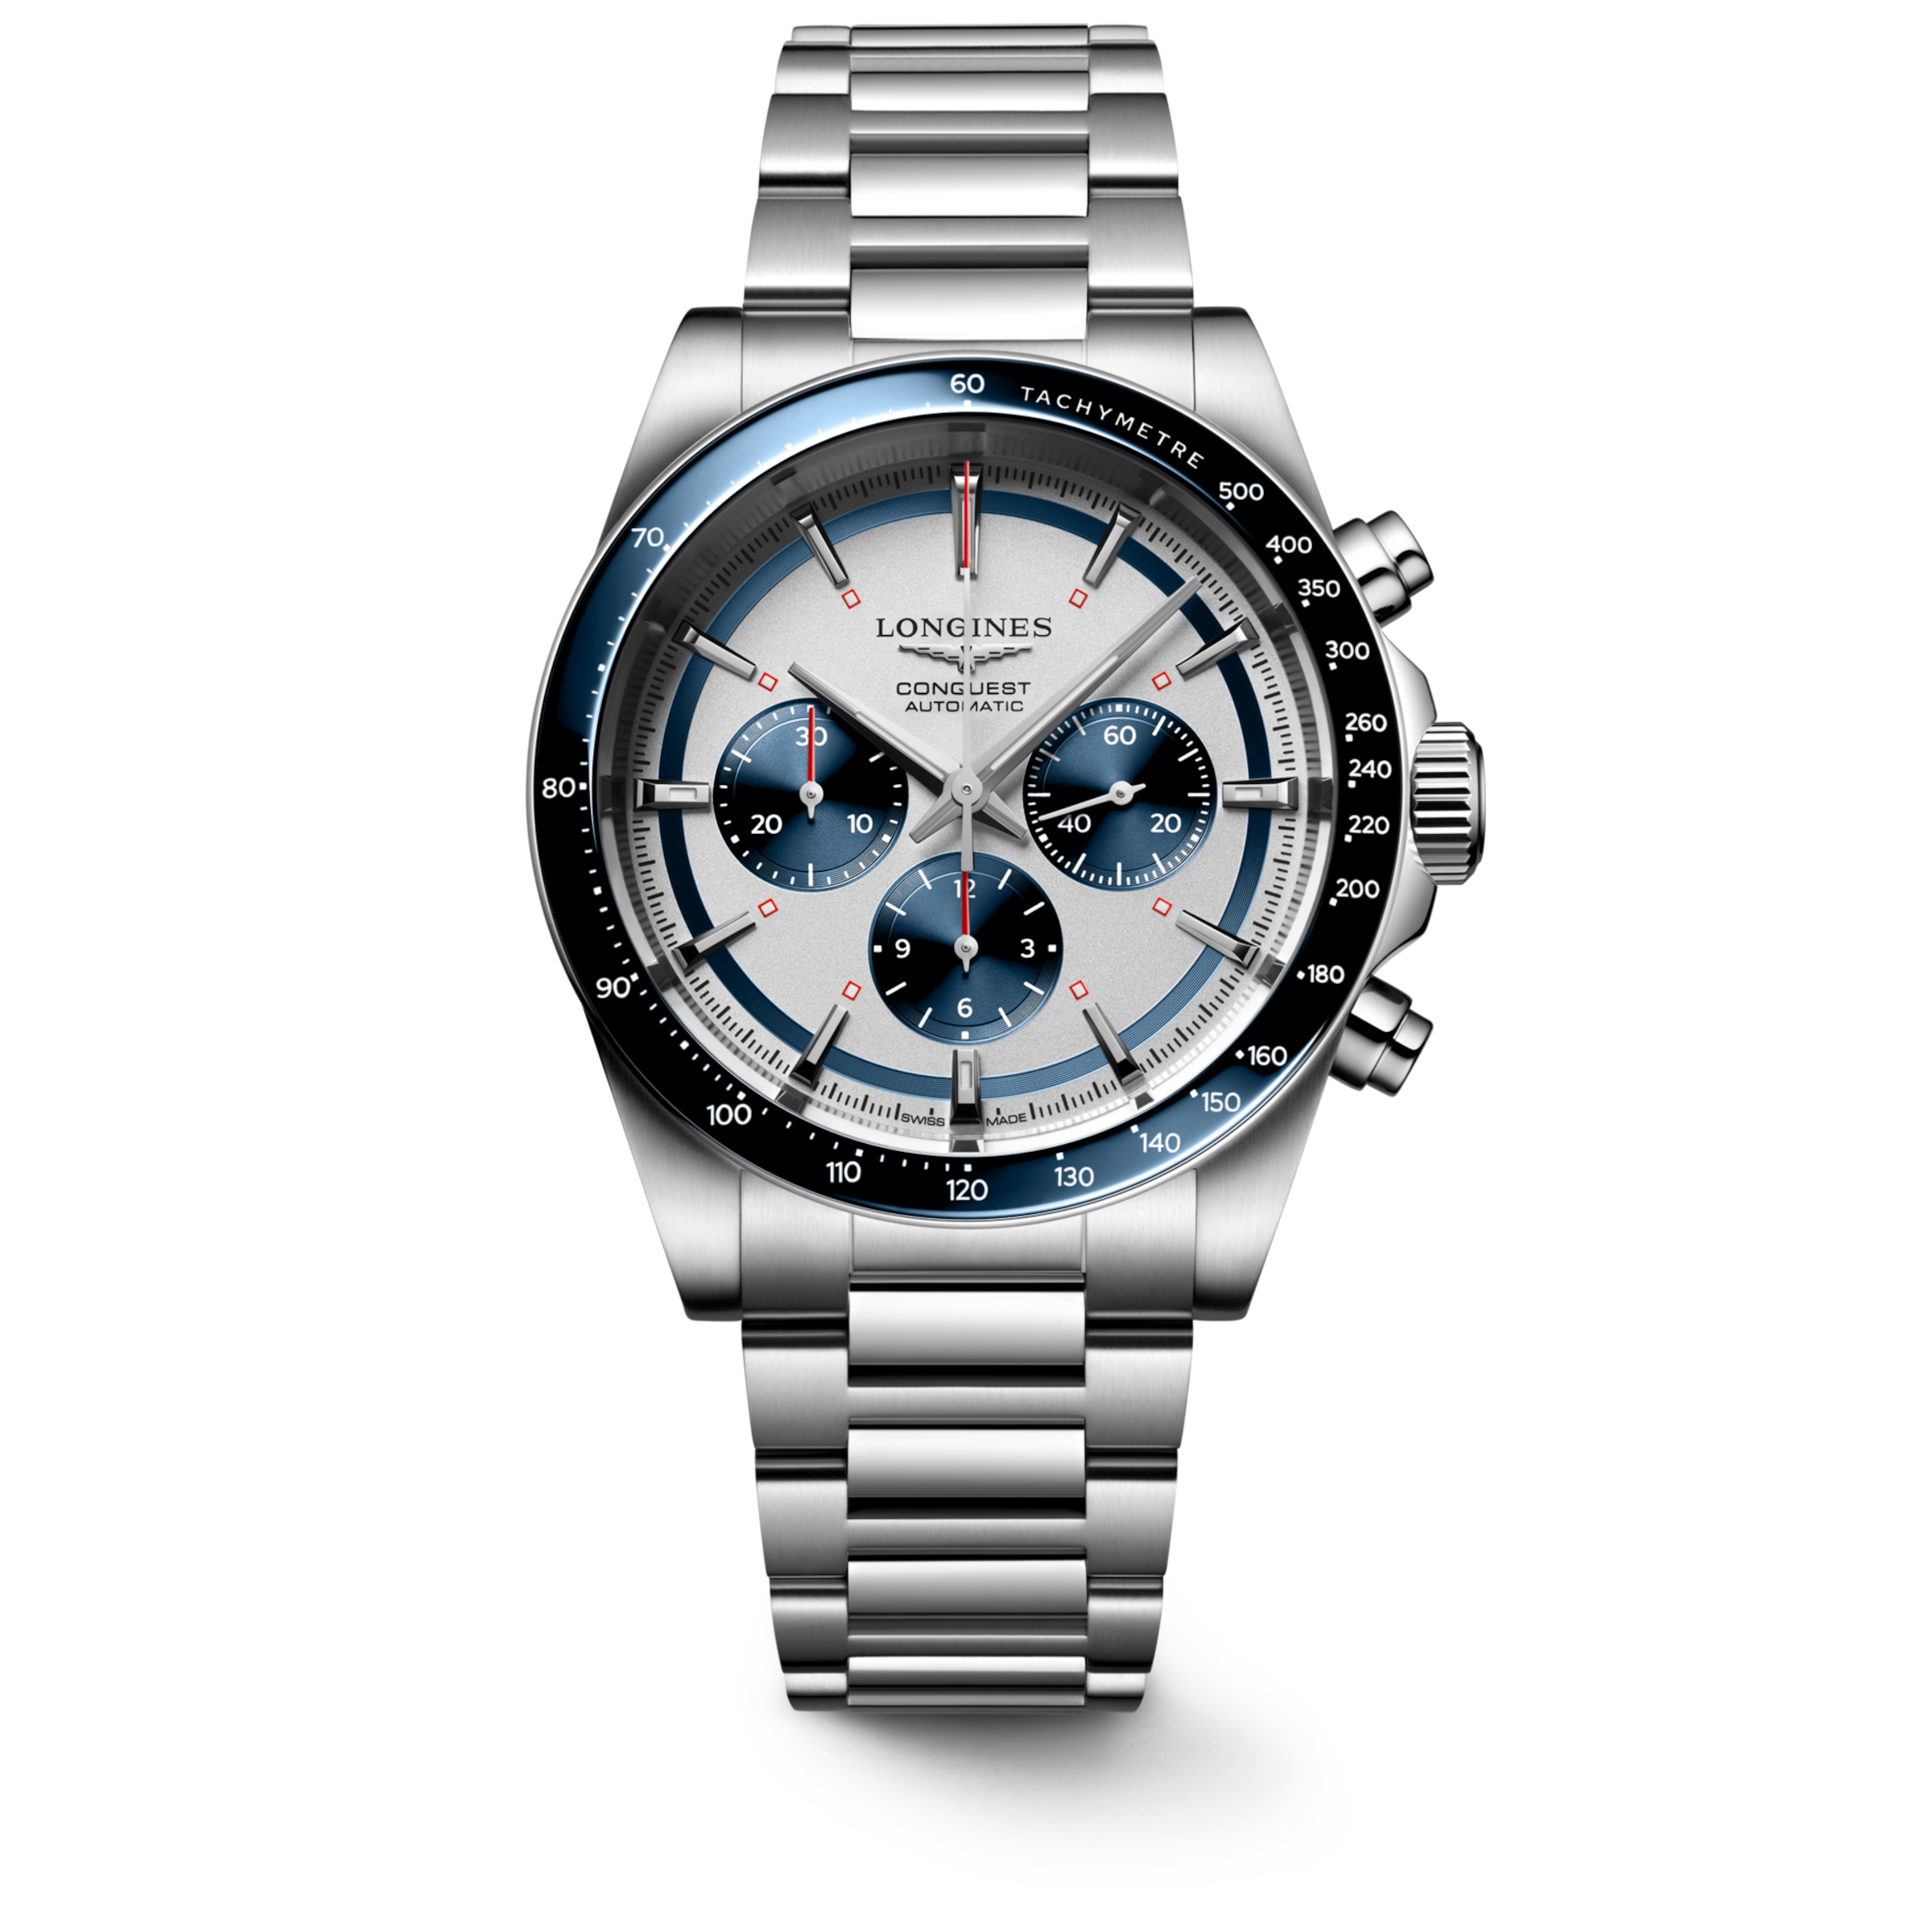 Longines CONQUEST Automatic Stainless steel and ceramic bezel Watch - L3.835.4.98.6